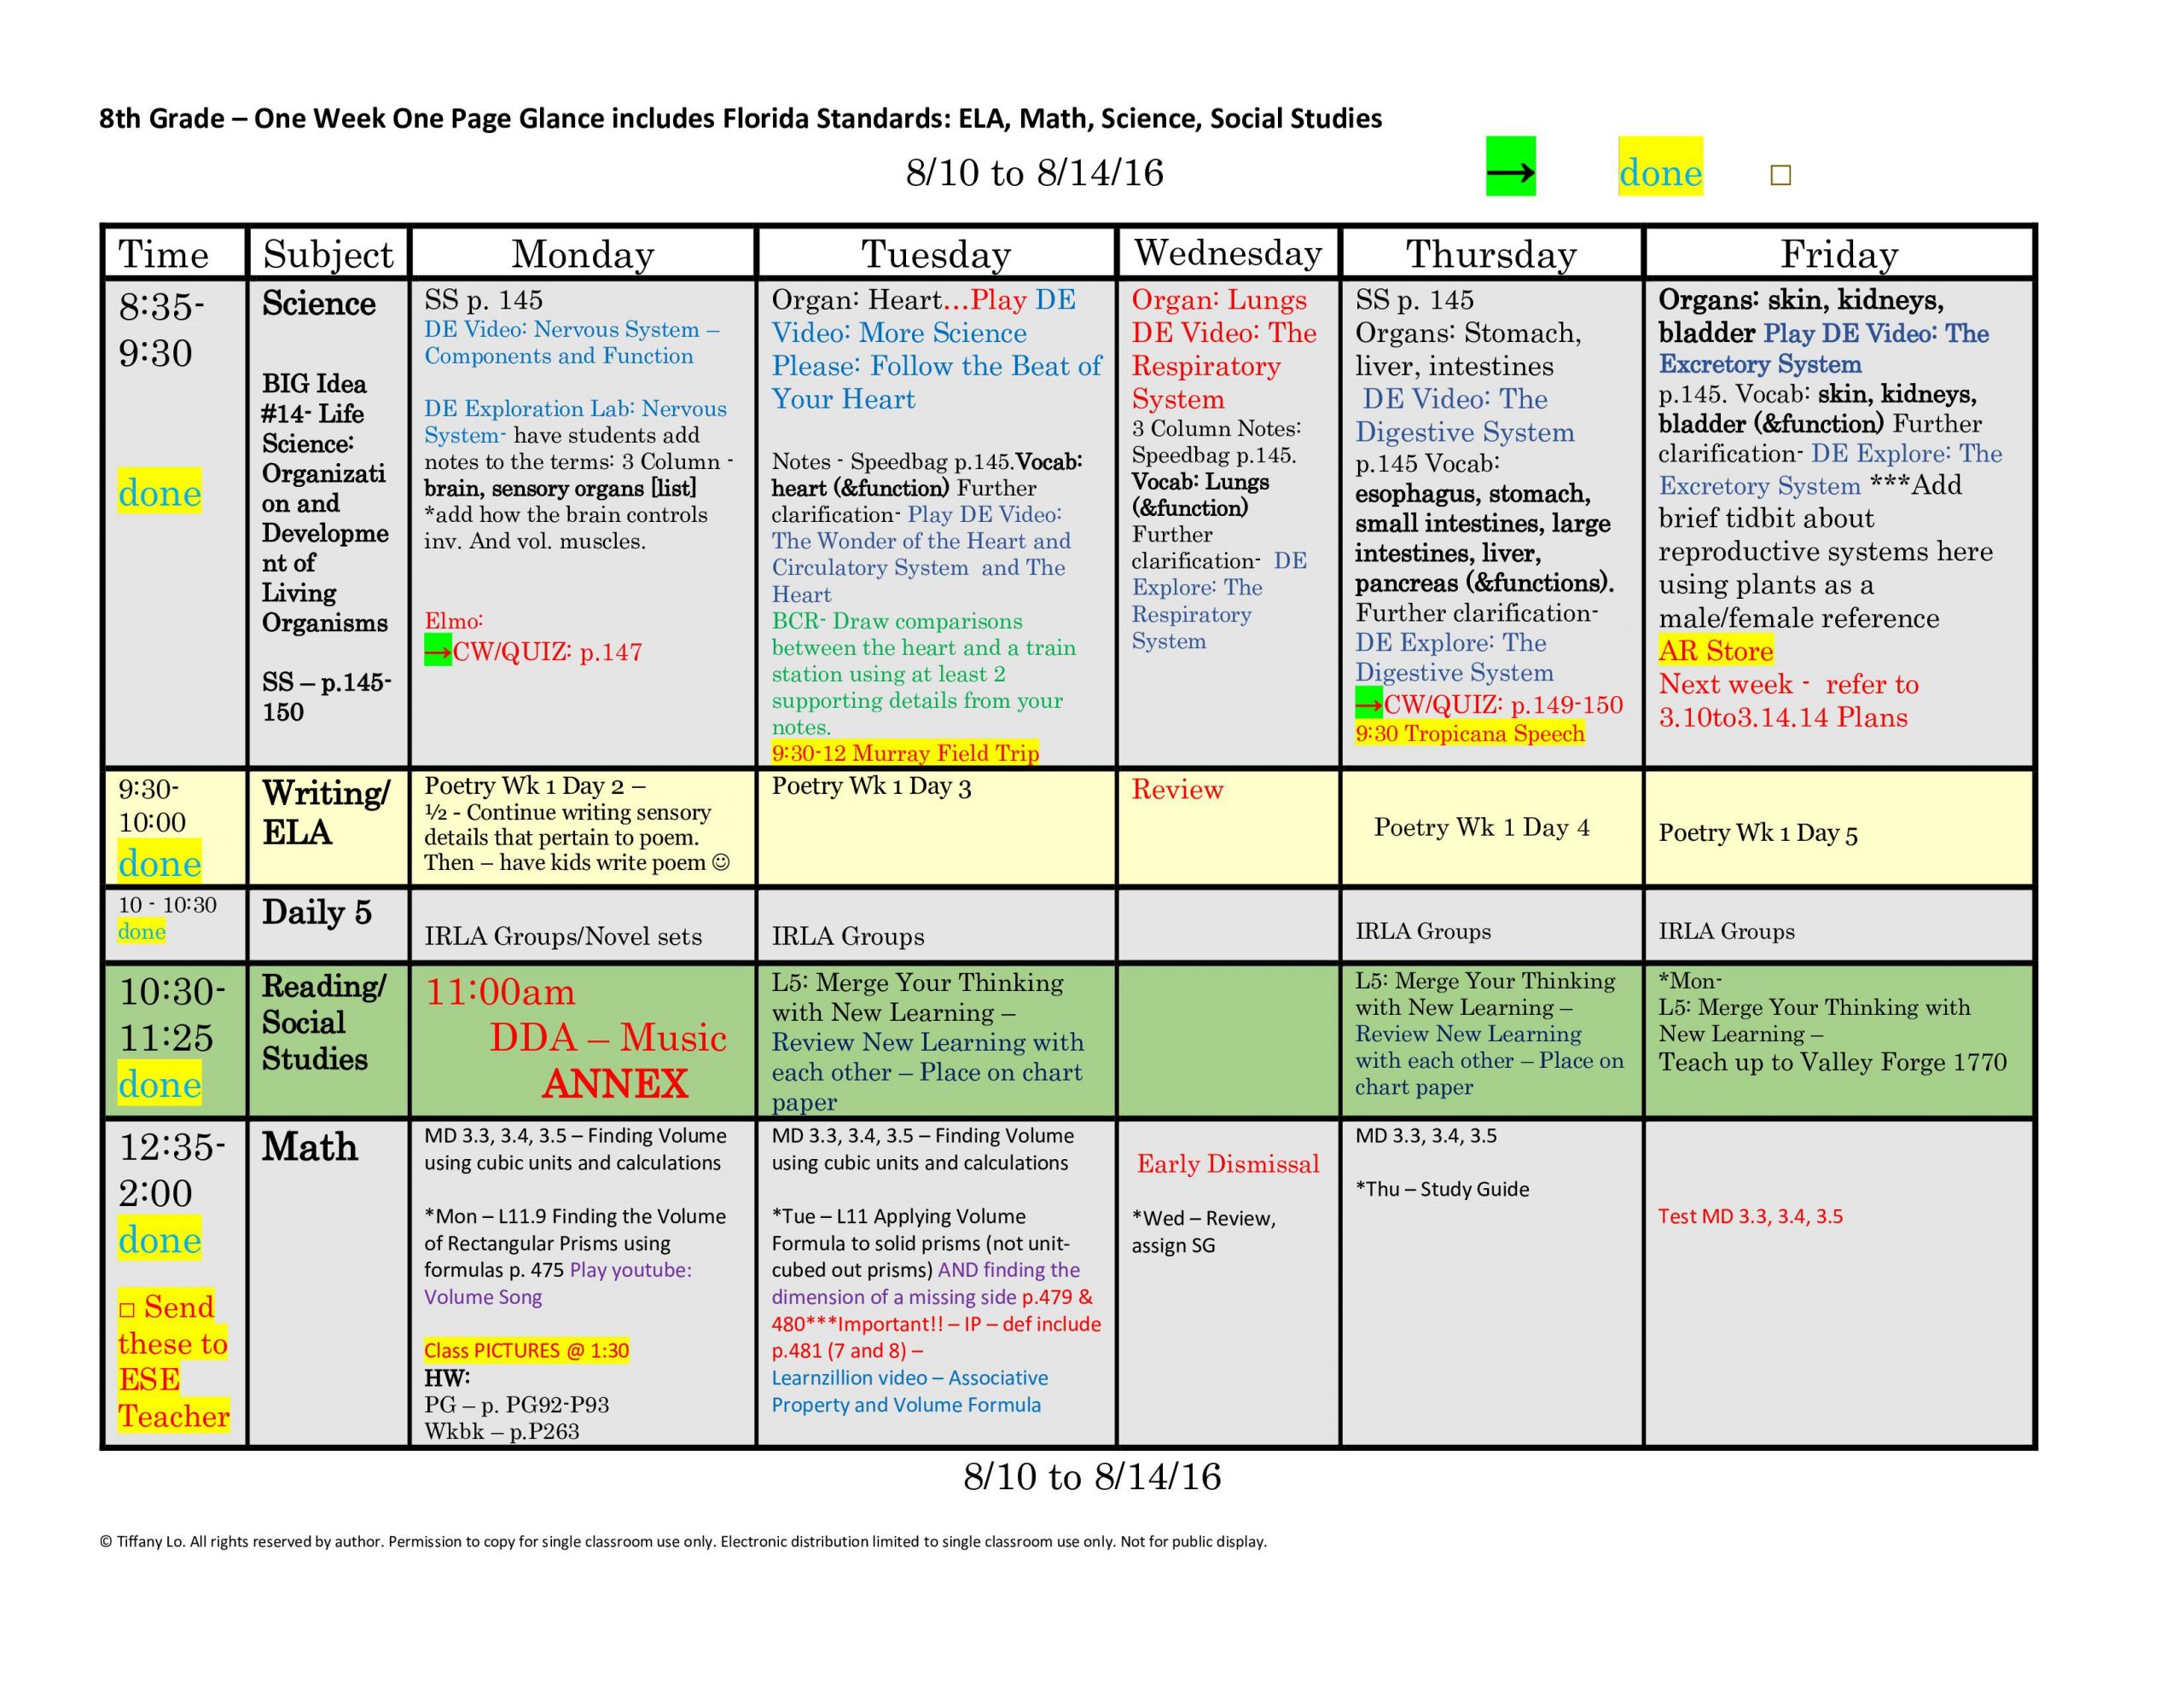 8Th Eighth Grade Florida Standards Weekly Lesson Plan Template: 1 Week 1  Glance